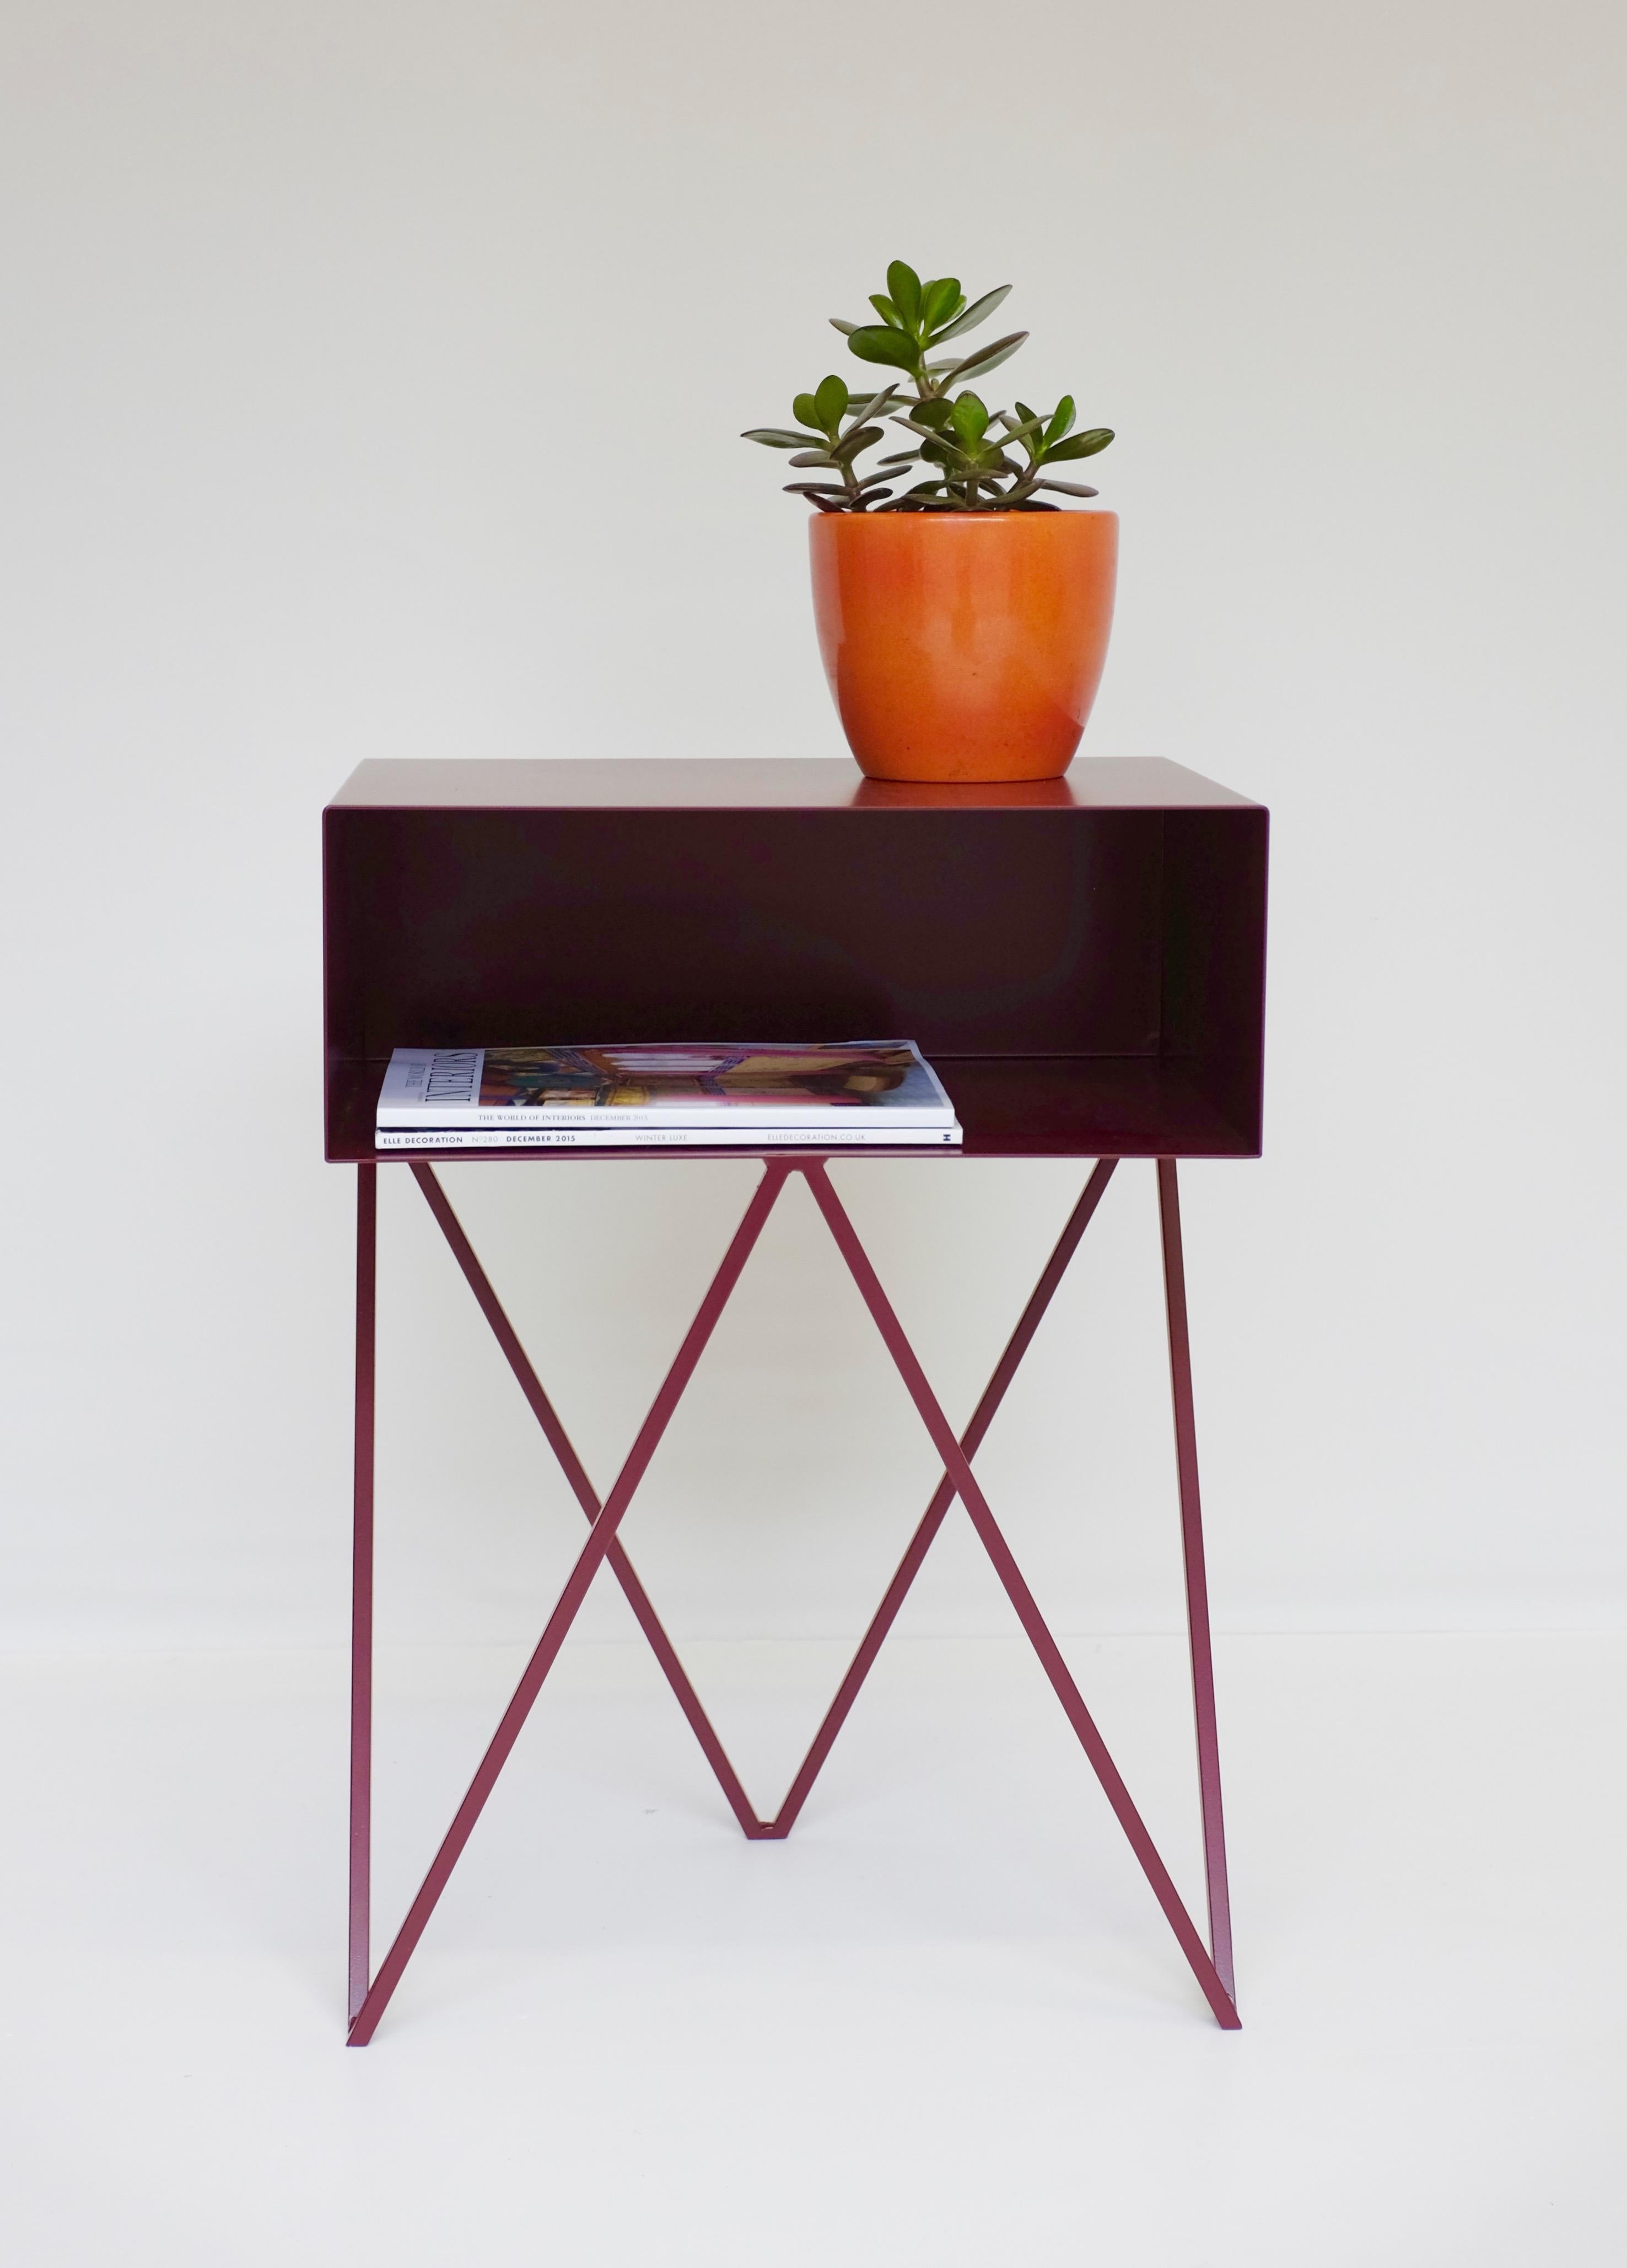 A pair of burgundy powder-coated steel robot bedside tables. The Robot side table features an open shelf on zig zag legs. A fun and functional design made of solid steel, powder-coated in blueberry. The clean lines look great against period details